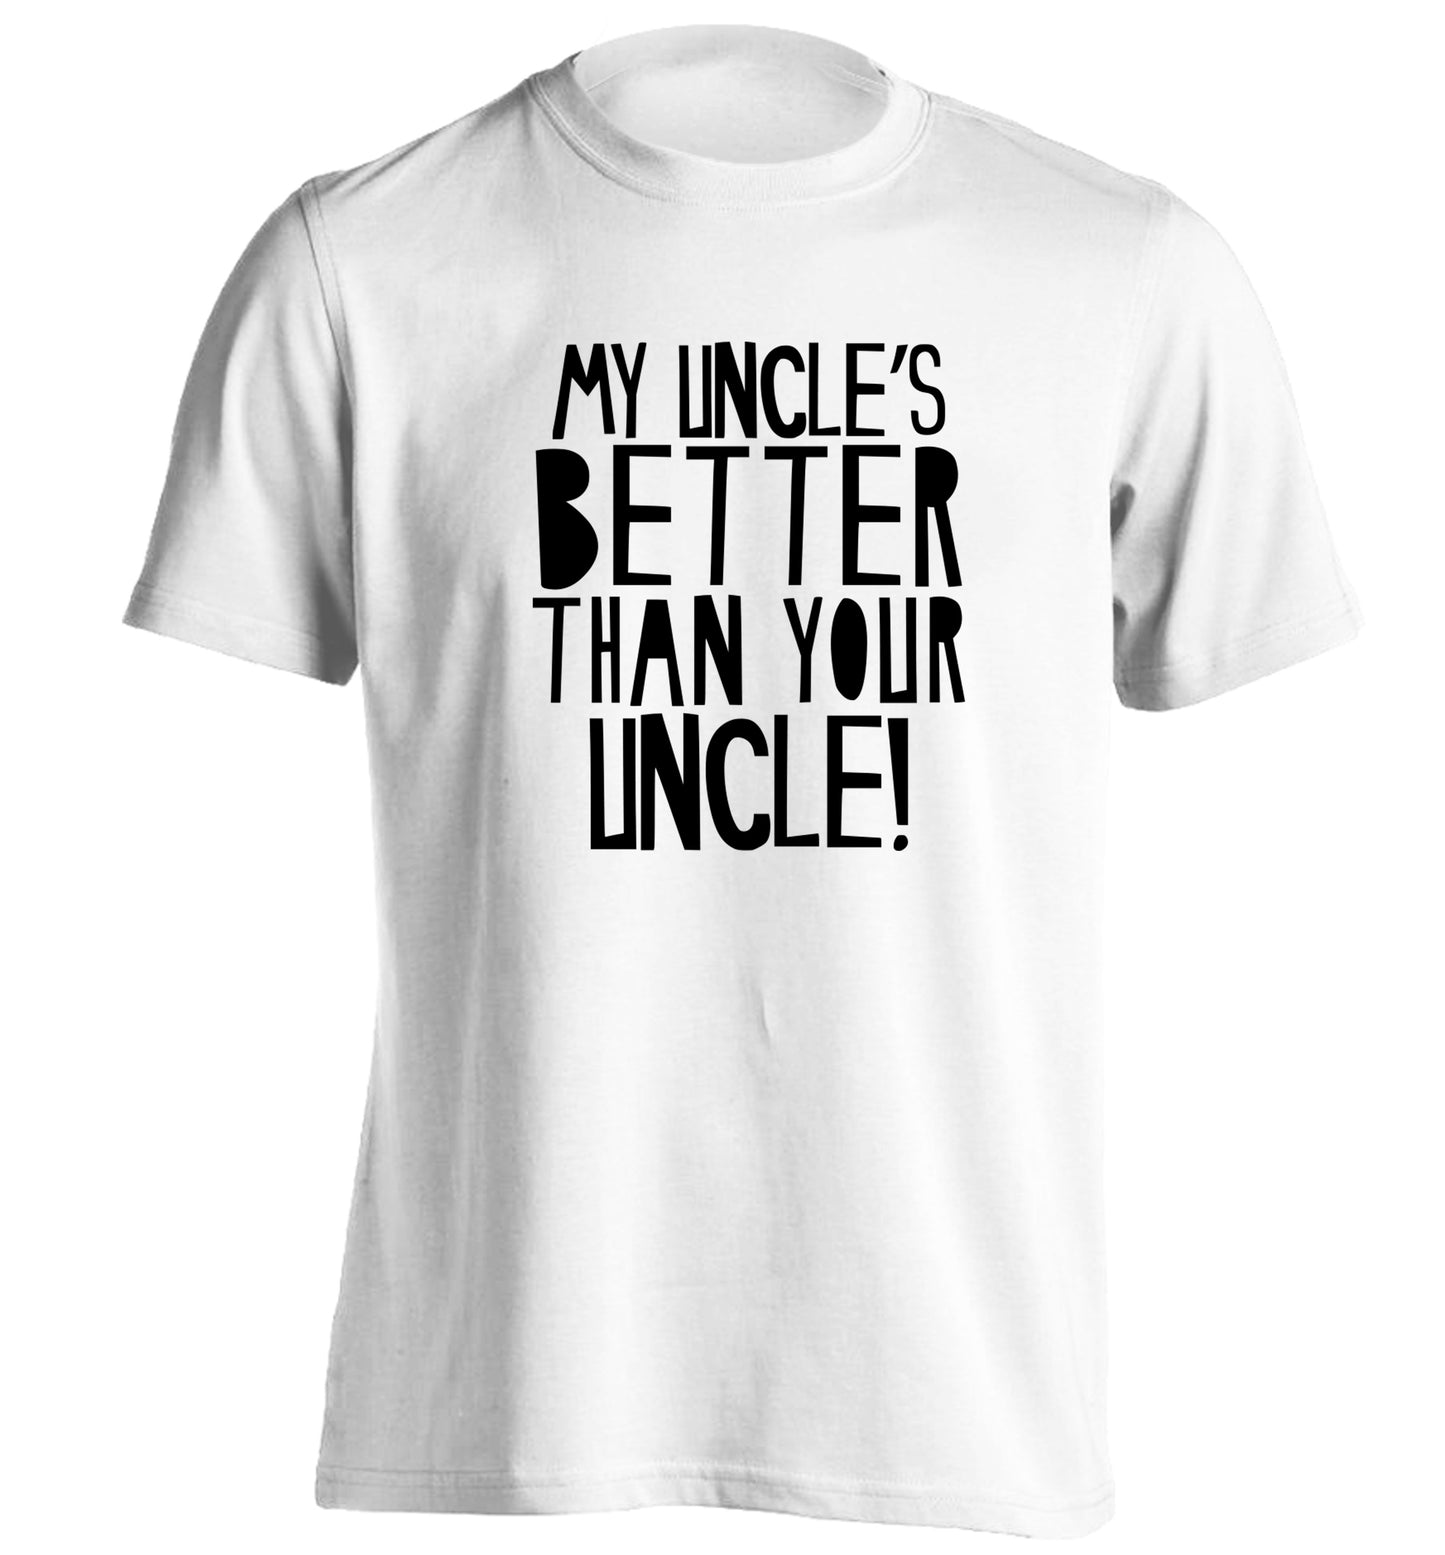 My uncles better than your uncle adults unisex white Tshirt 2XL